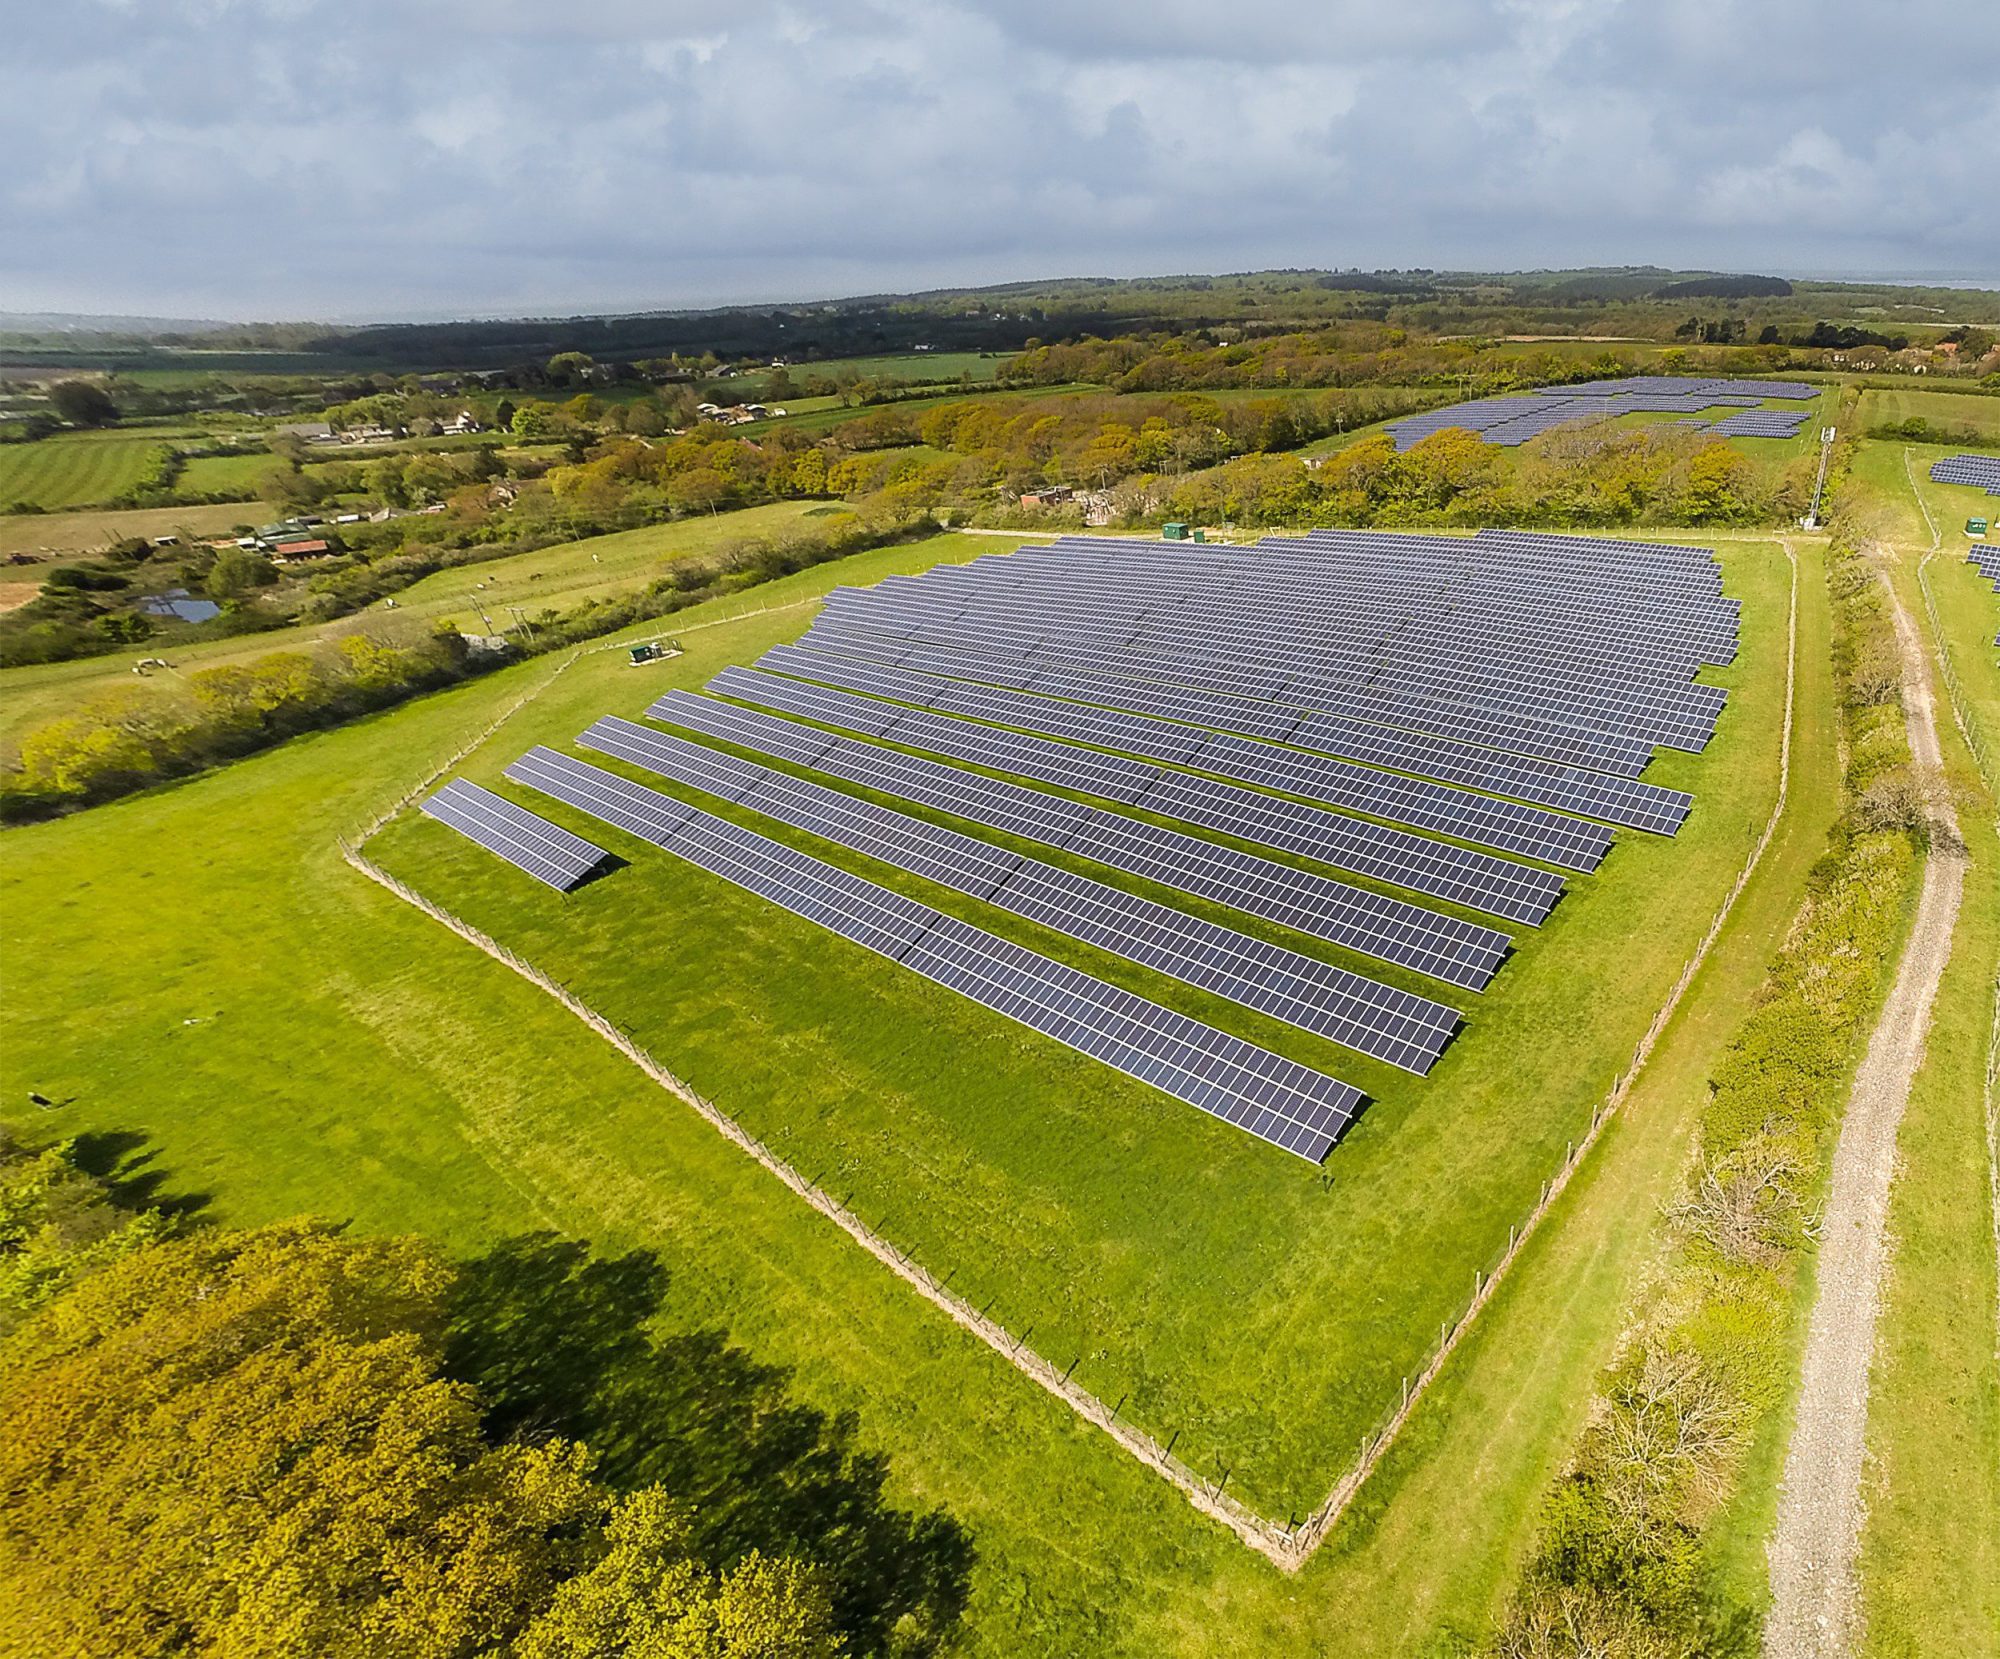 £195,000 released early so community solar farms can help local people face the COVID-19 crisis